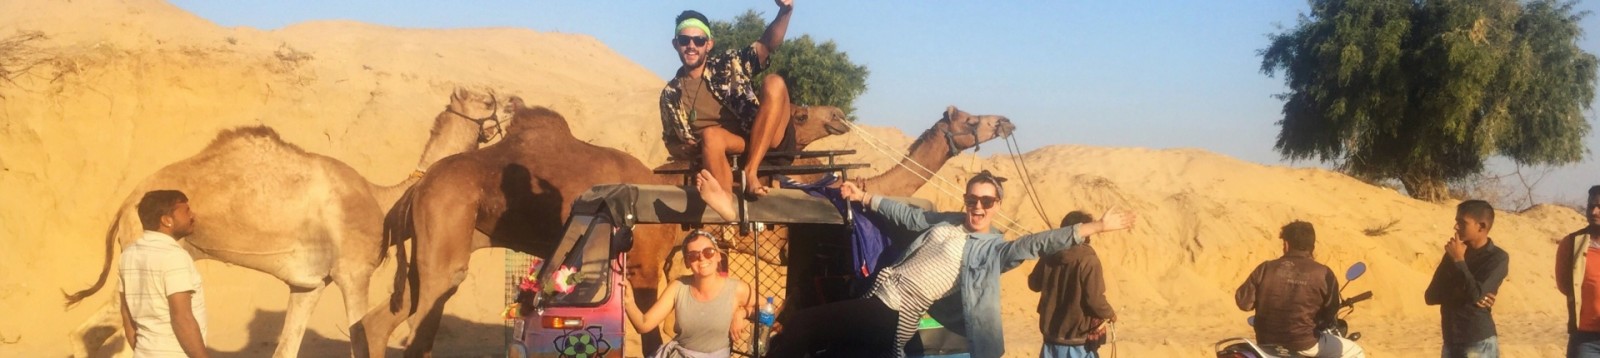 tuk tuk and camels on the fundraising adventure of a lifetime